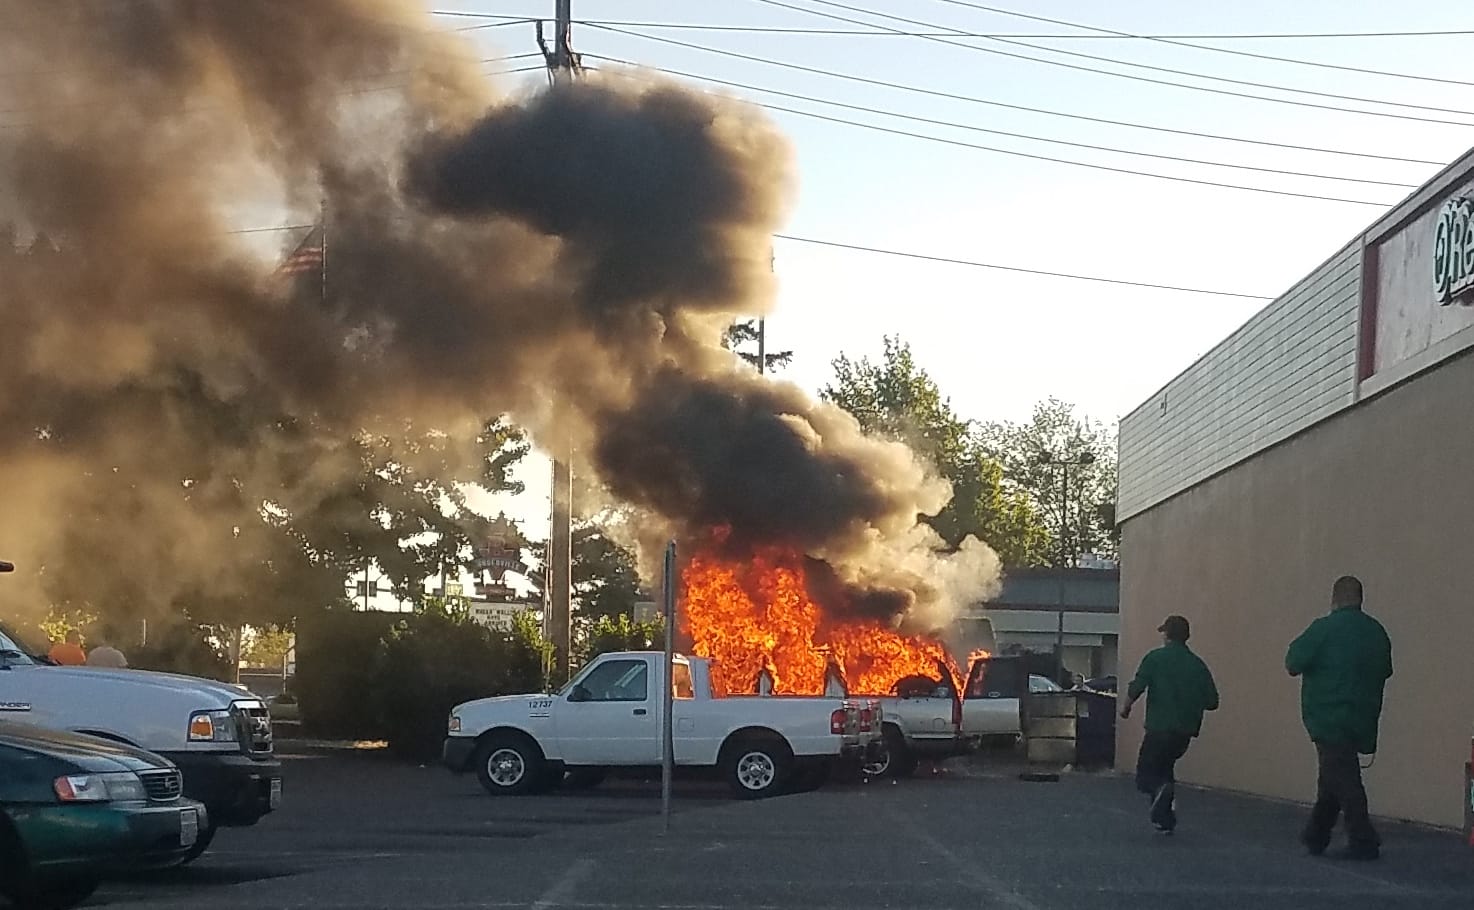 Fire burns in an SUV in the parking lot of an auto parts store in Vancouver Saturday evening. No injuries were reported.